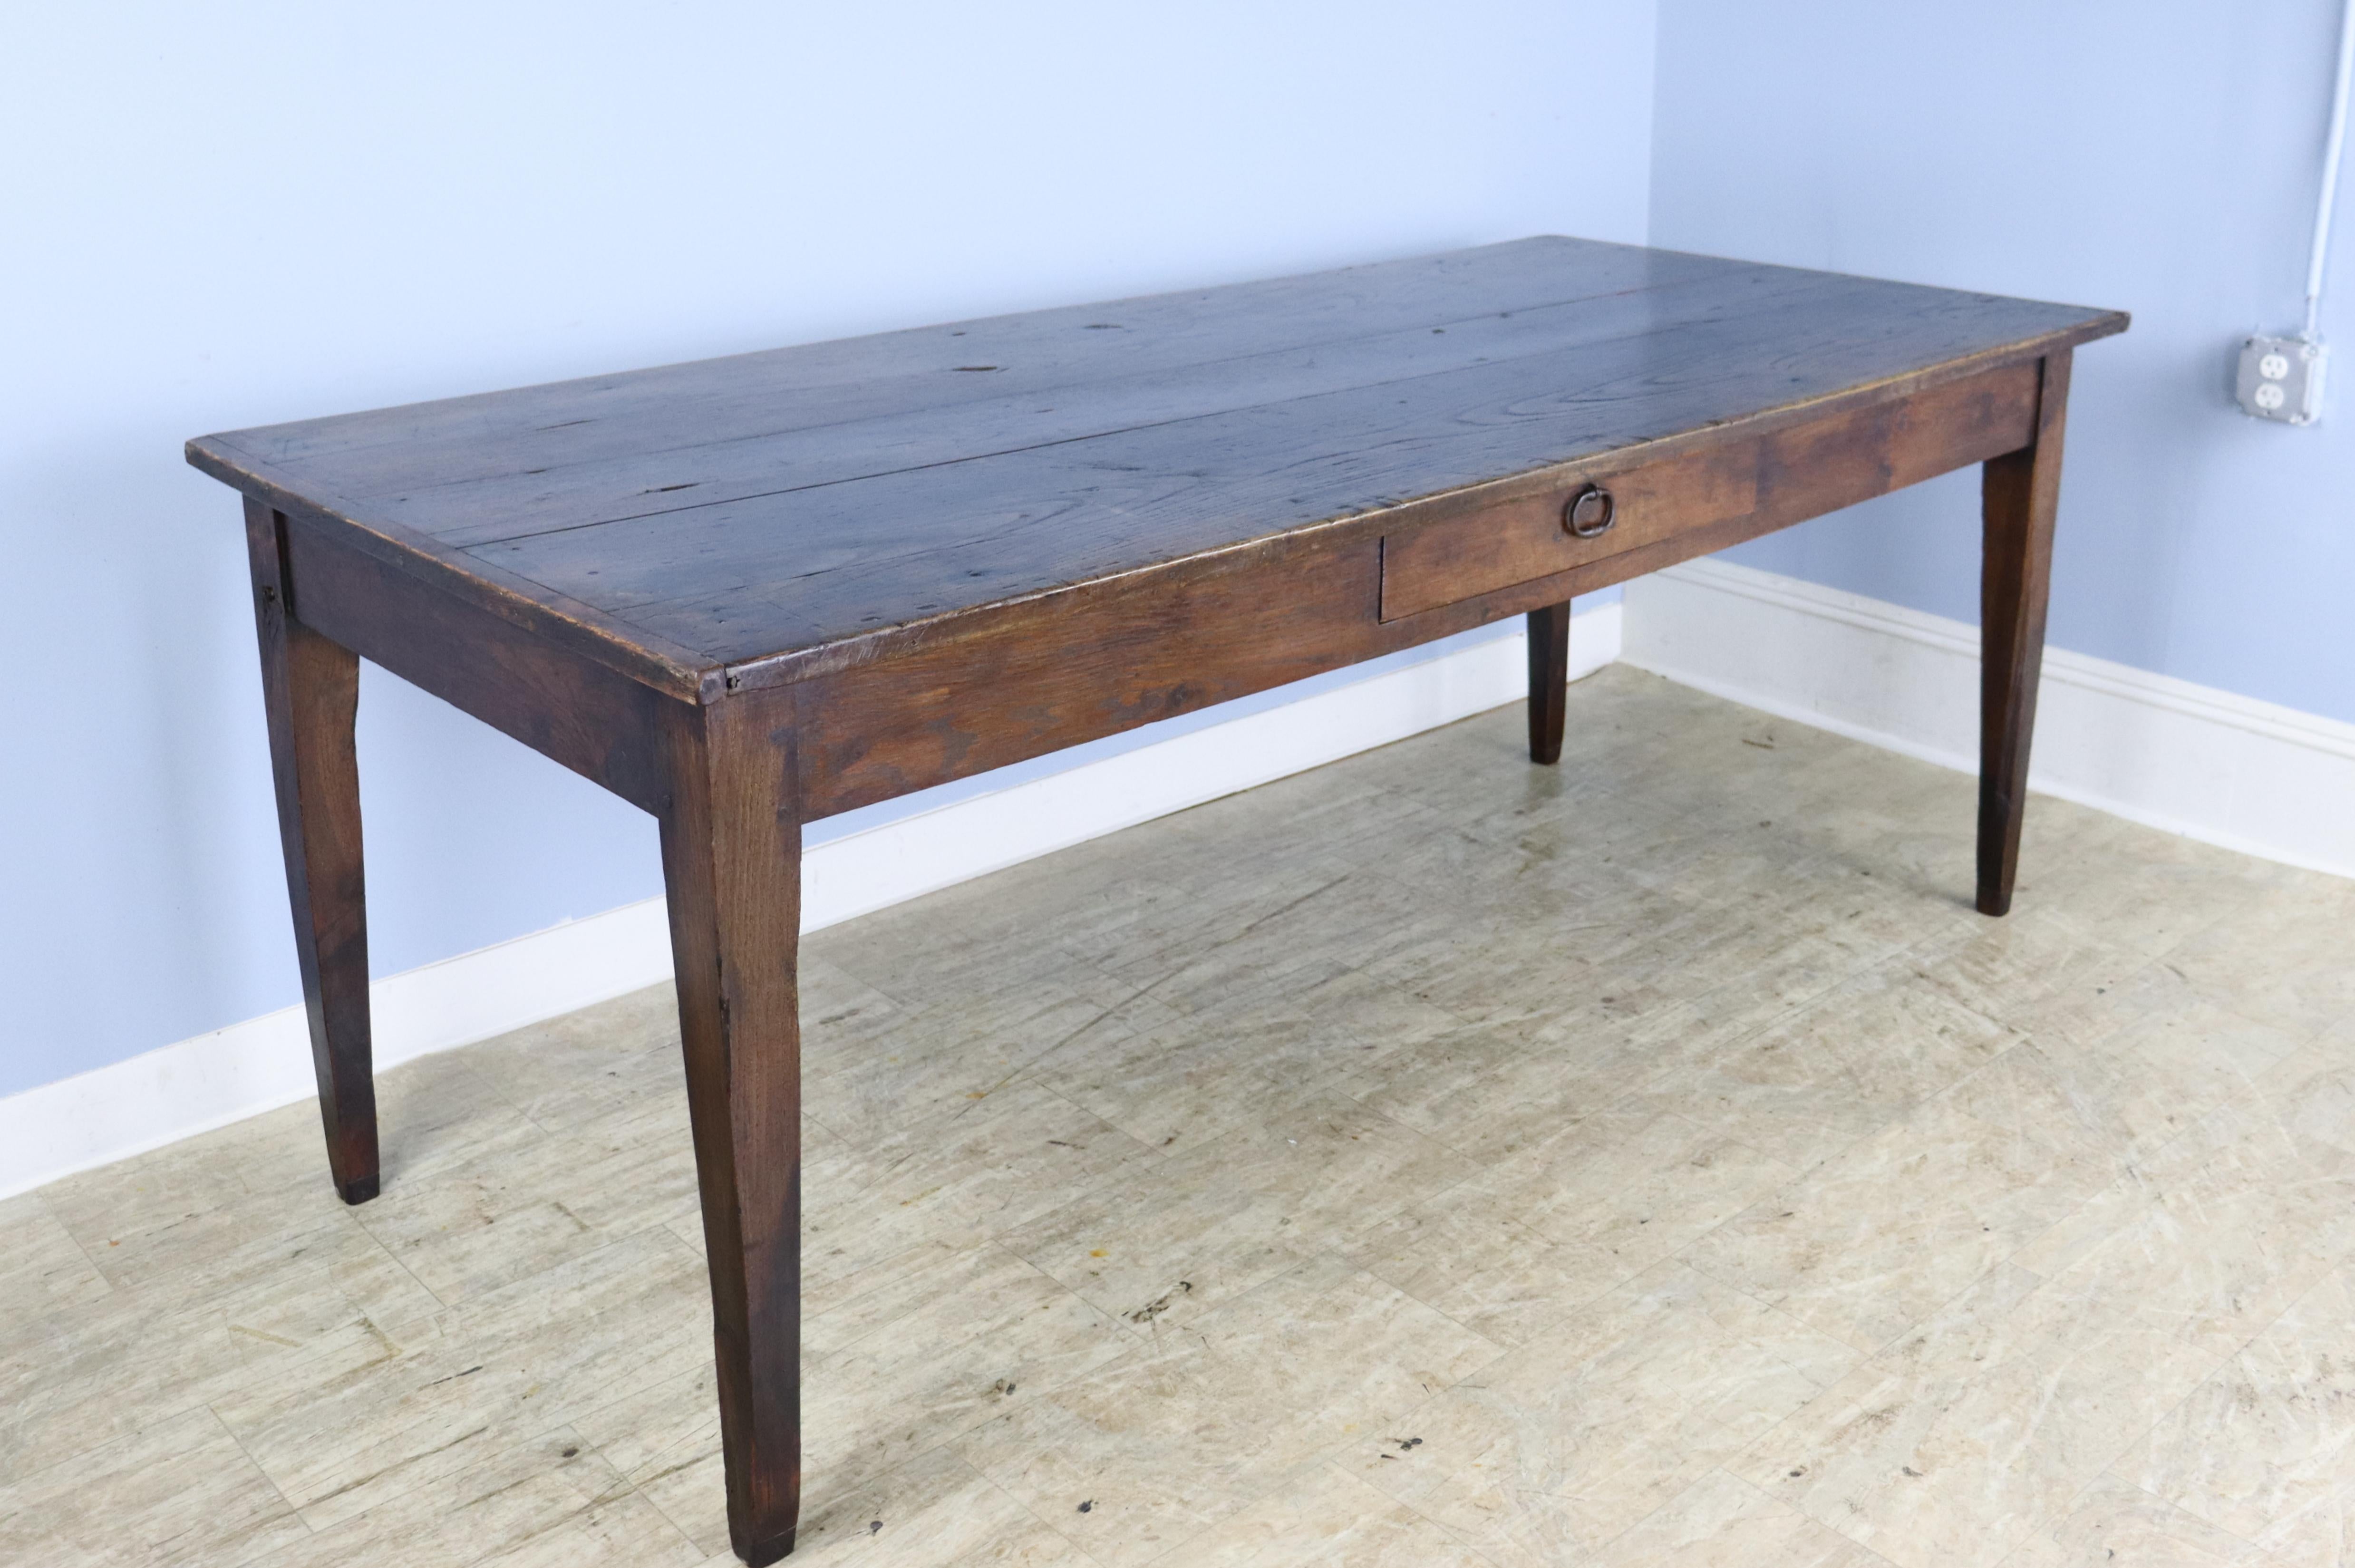 An elegant chestnut farm table with two roomy drawers amd small breadboard ends. Well grained tapered legs, pegged at the apron. 24.25 inch apron height is good for knees and there are 70.5 inches between the legs on the long side. The top is some